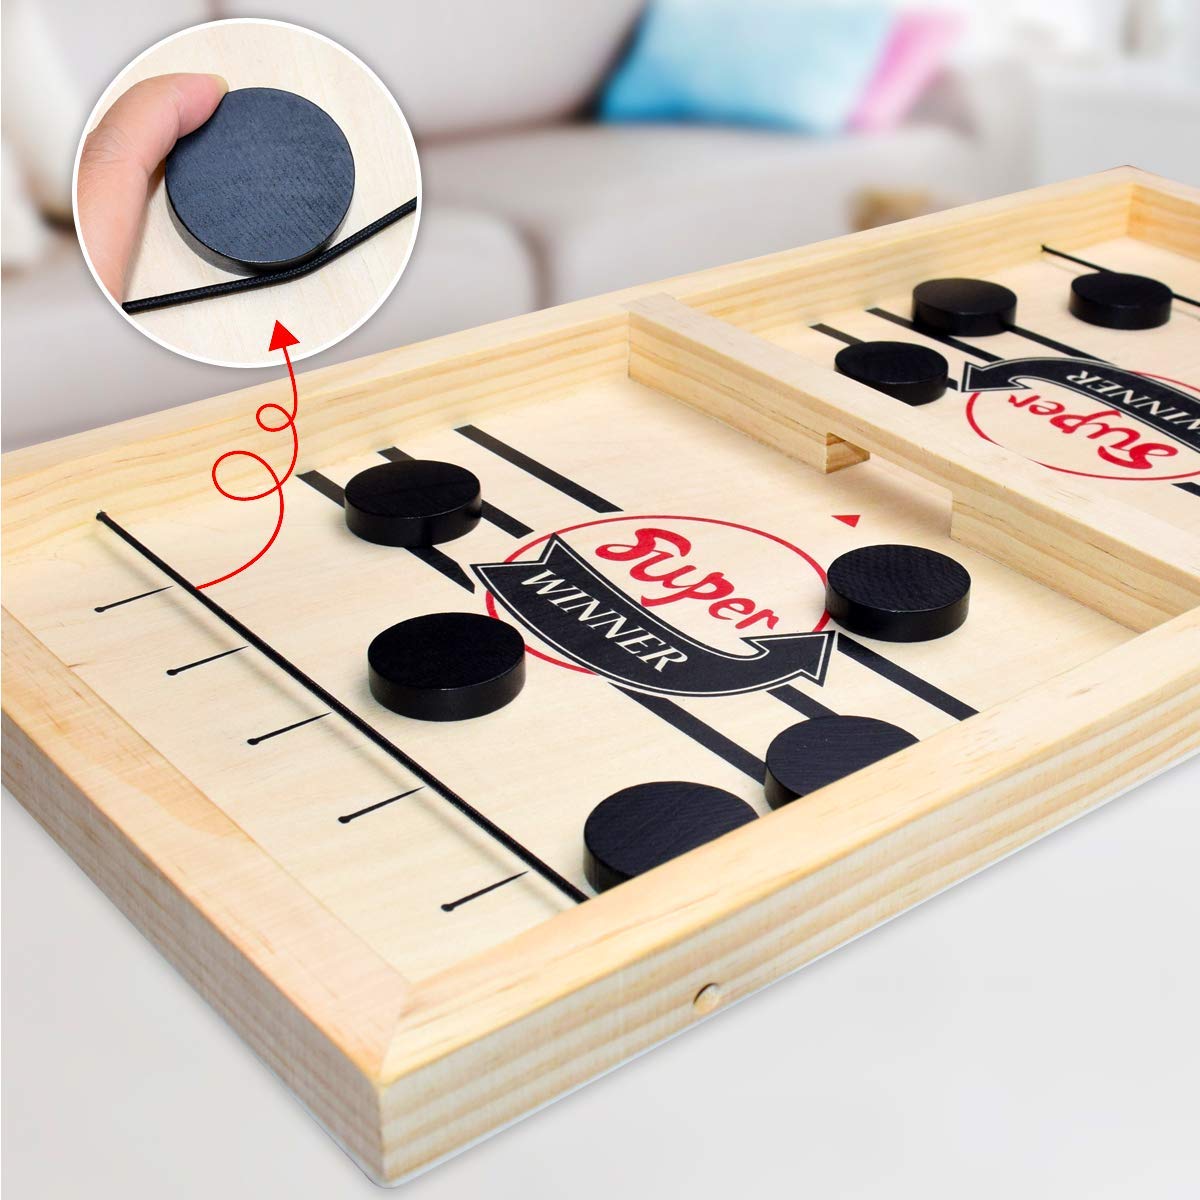 BAKAM Super Fast Sling Puck Game, Portable Table Hockey Game for Kids and Adults, Tabletop Slingshot Games Toys for Boys and Girls, Desktop Sport Board Game for Family Game Night Fun (Large)